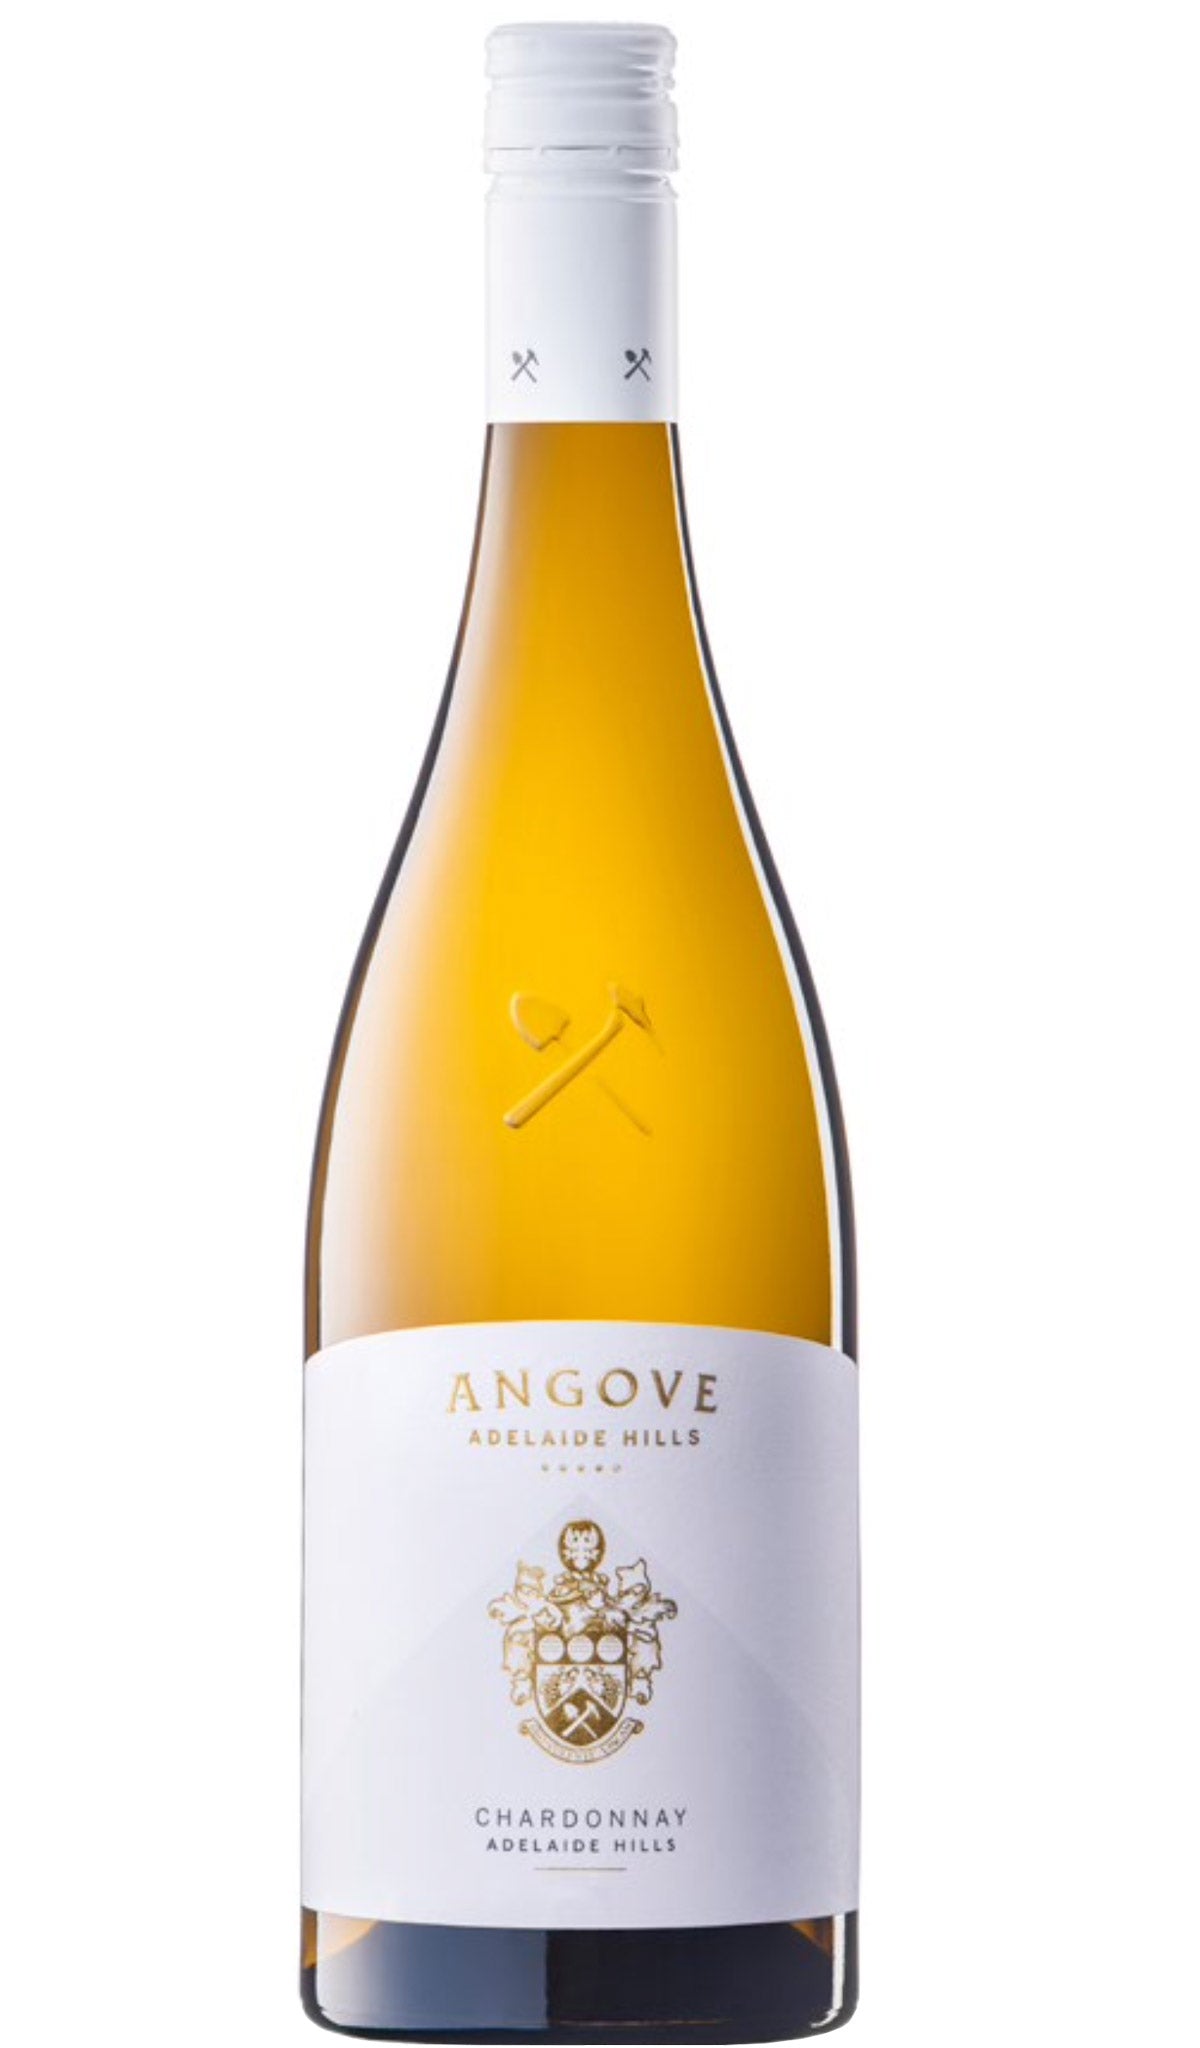 Find out more or buy Angove Family Crest Adelaide Hills Chardonnay 2022 online at Wine Sellers Direct - Australia’s independent liquor specialists.